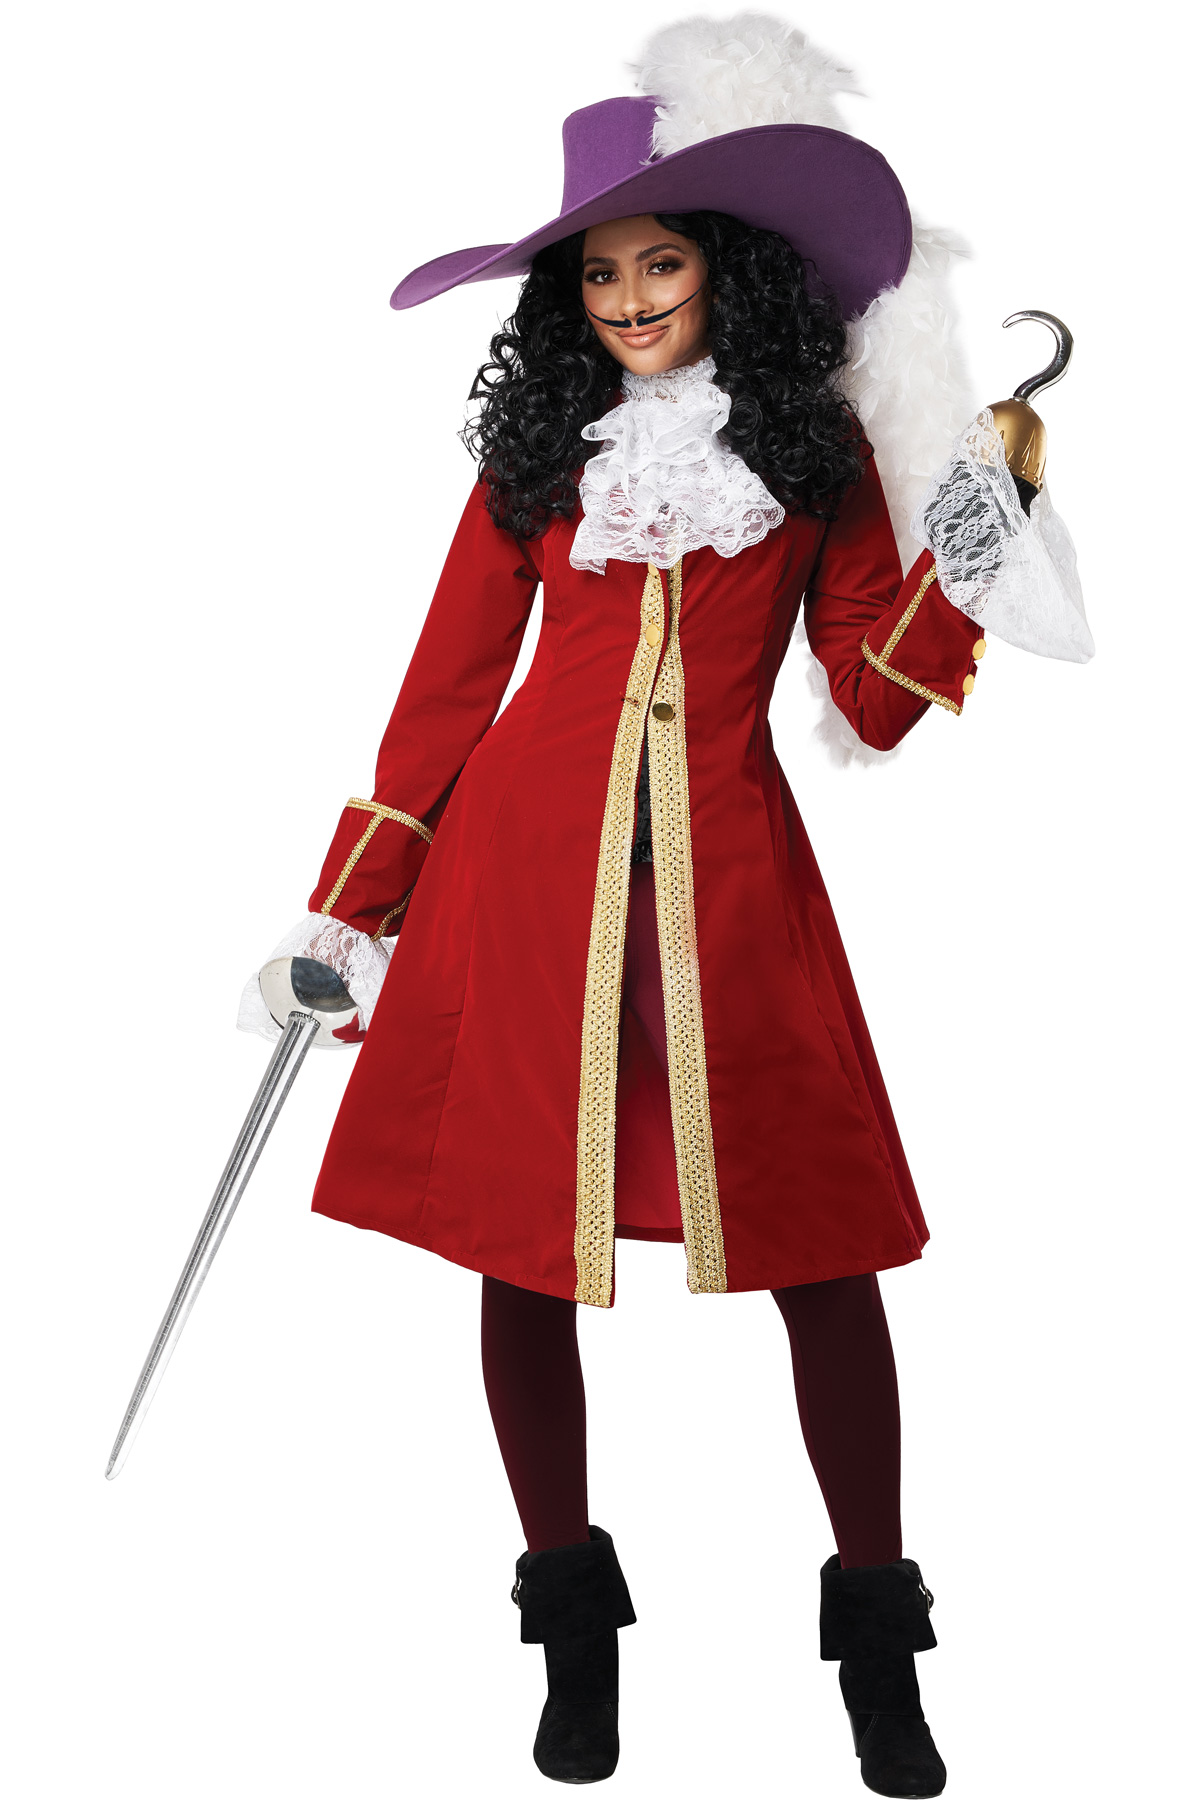 California Costume Captain Hook Adult Women Pirate Outfit 5022/061